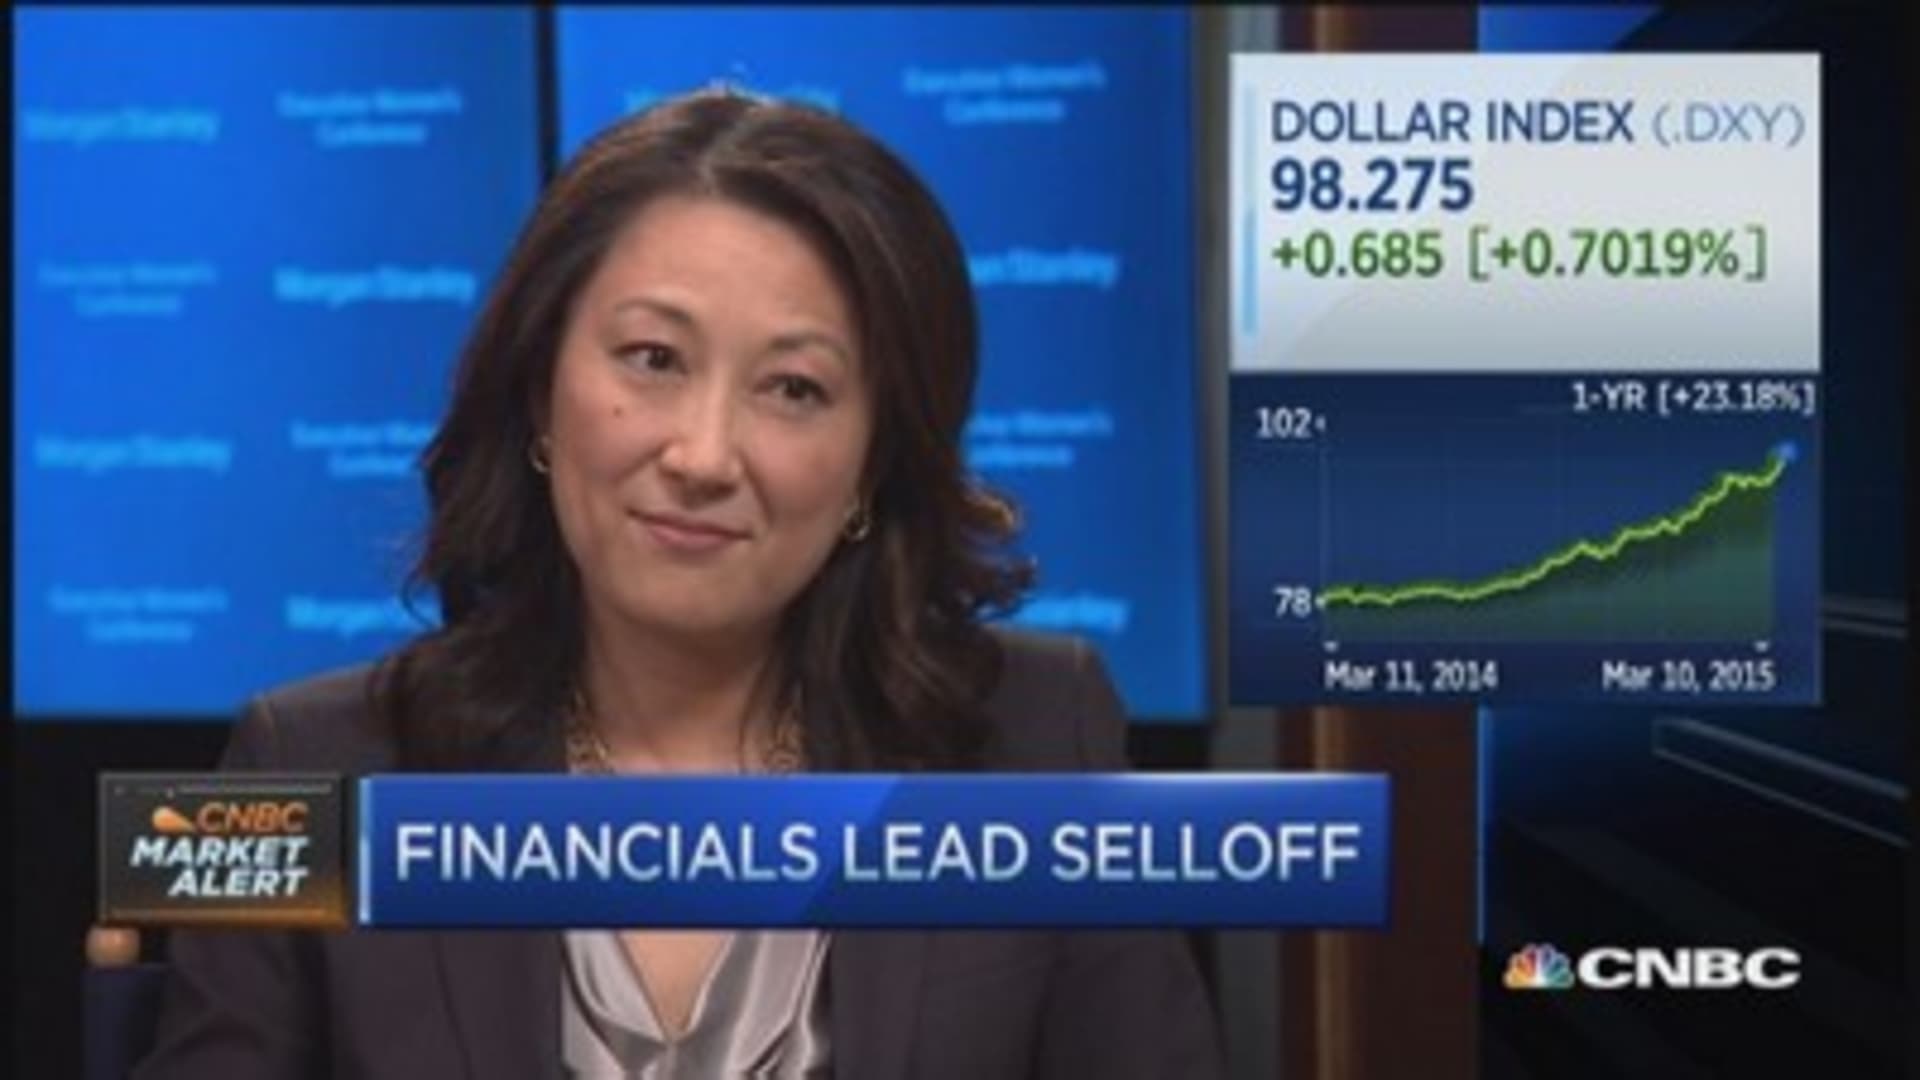 Robust year for M&A: Susie Huang